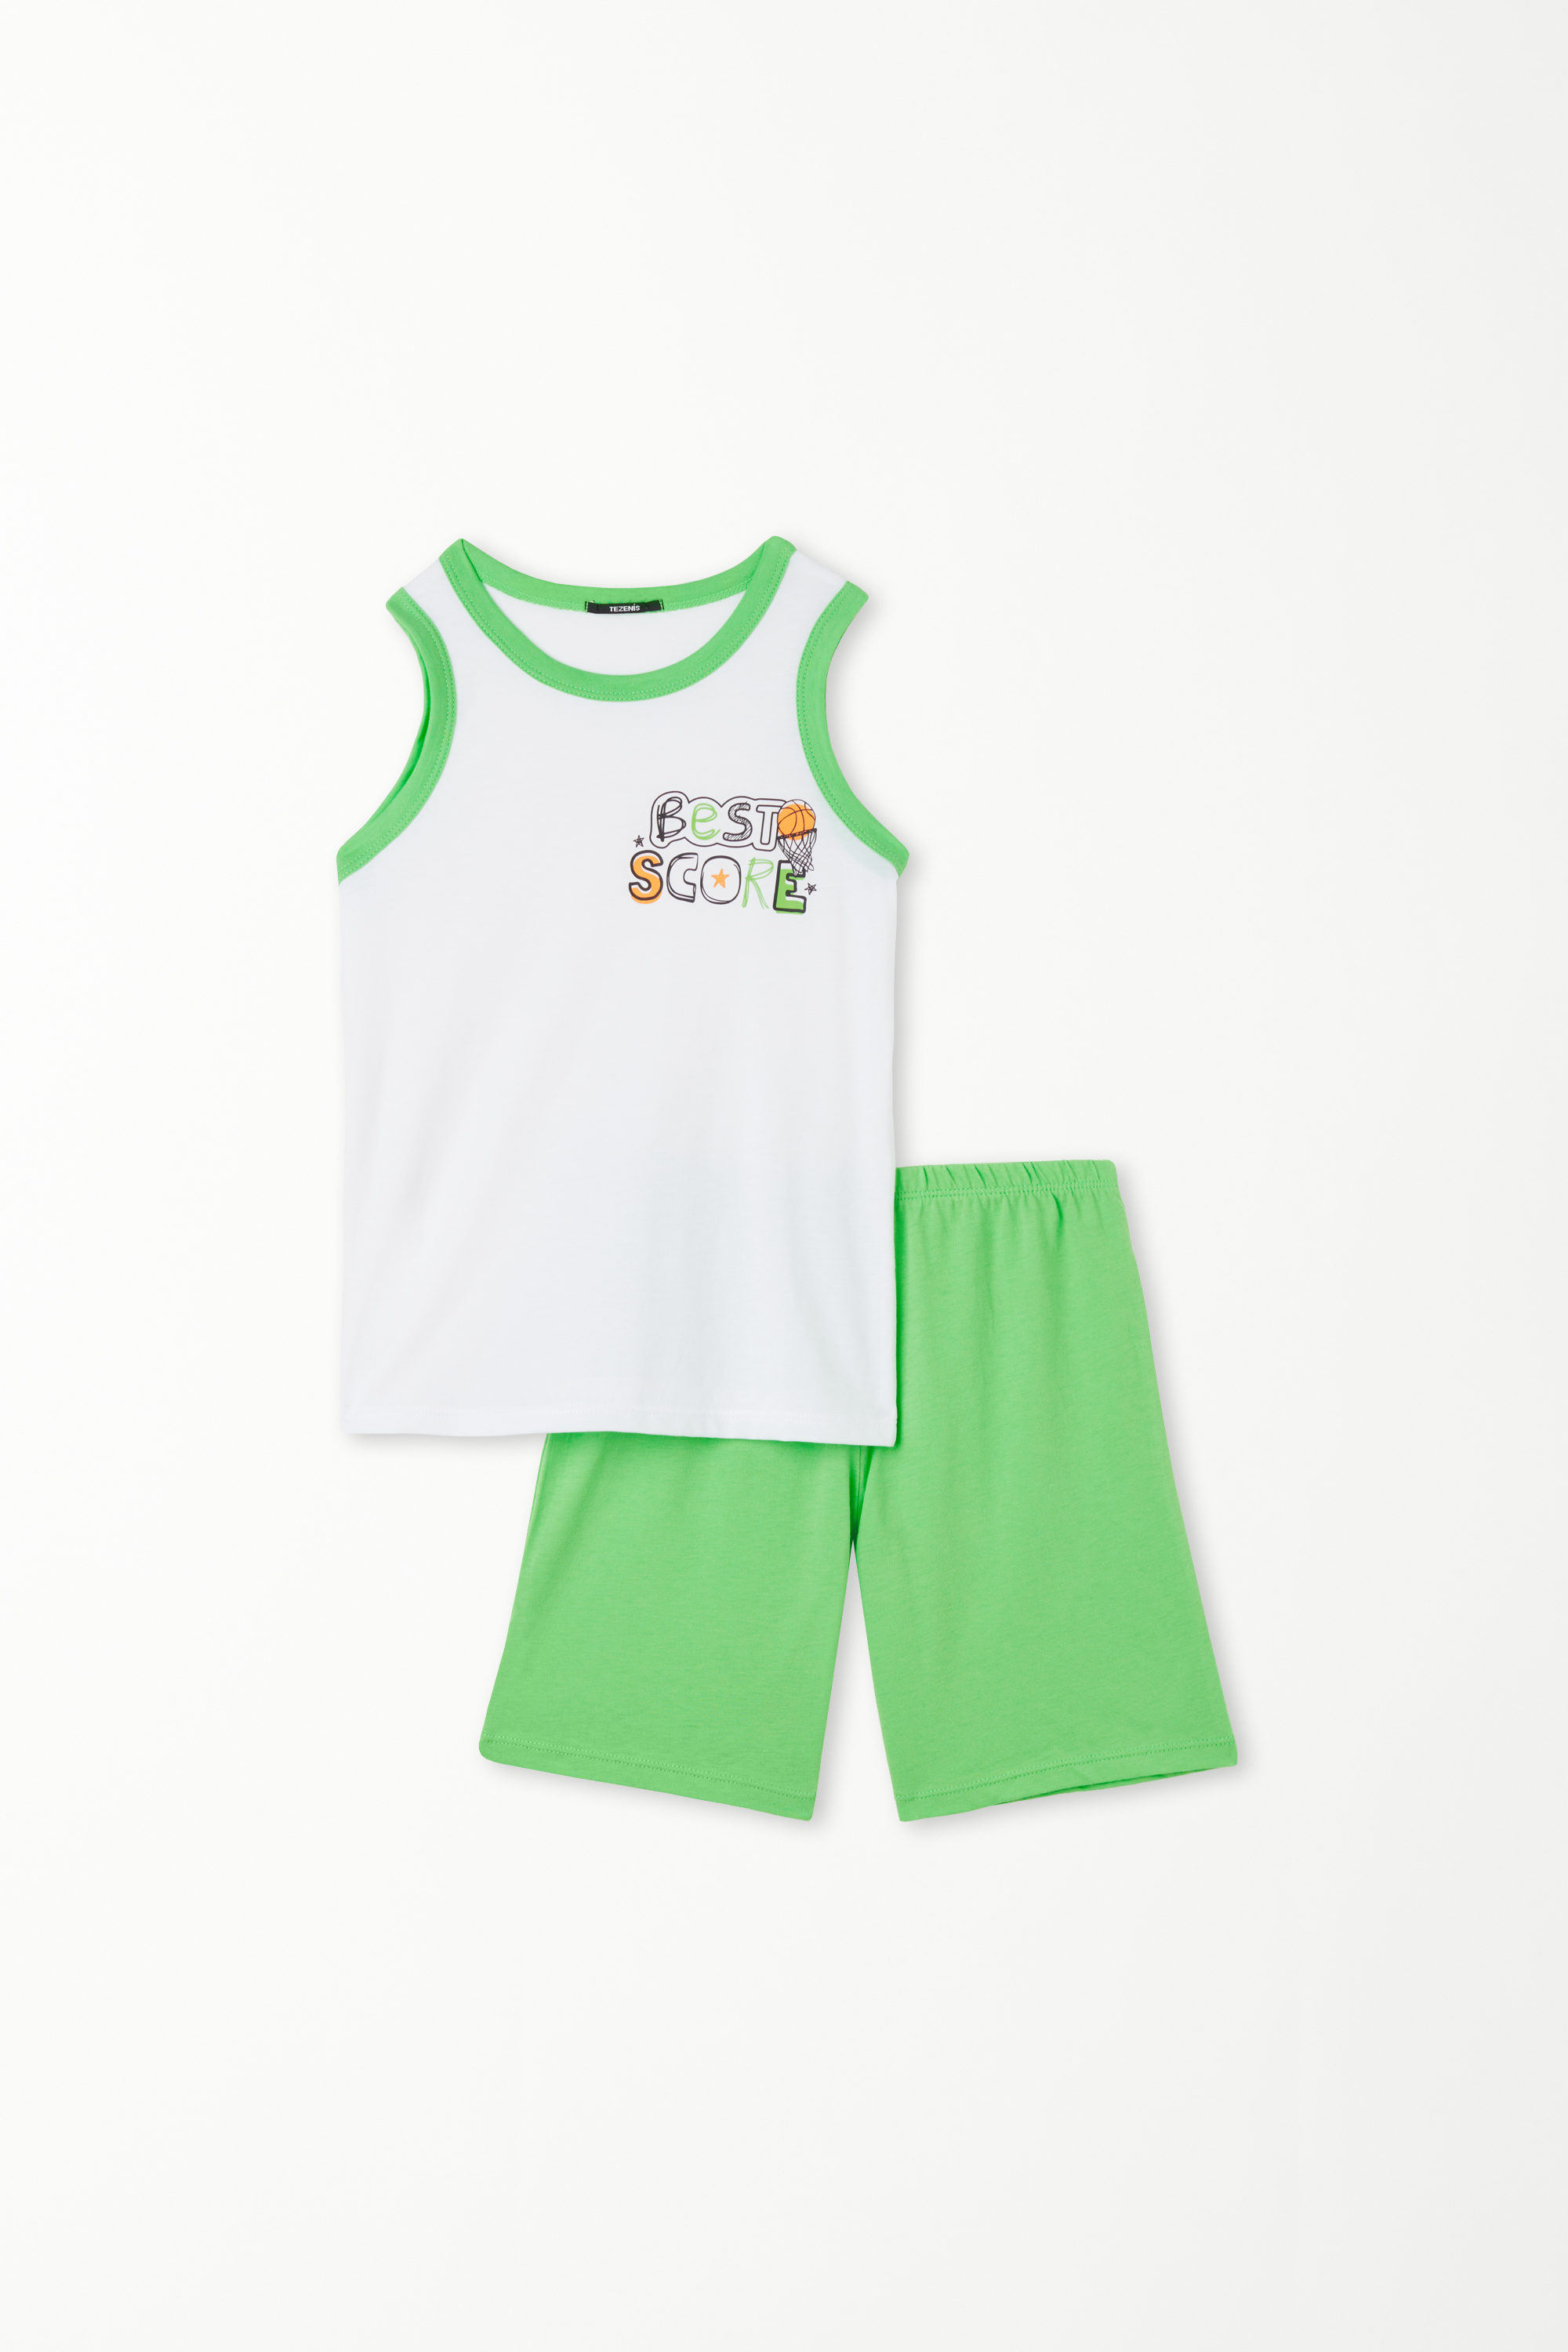 Boys’ Printed Cotton Vest and Shorts Set